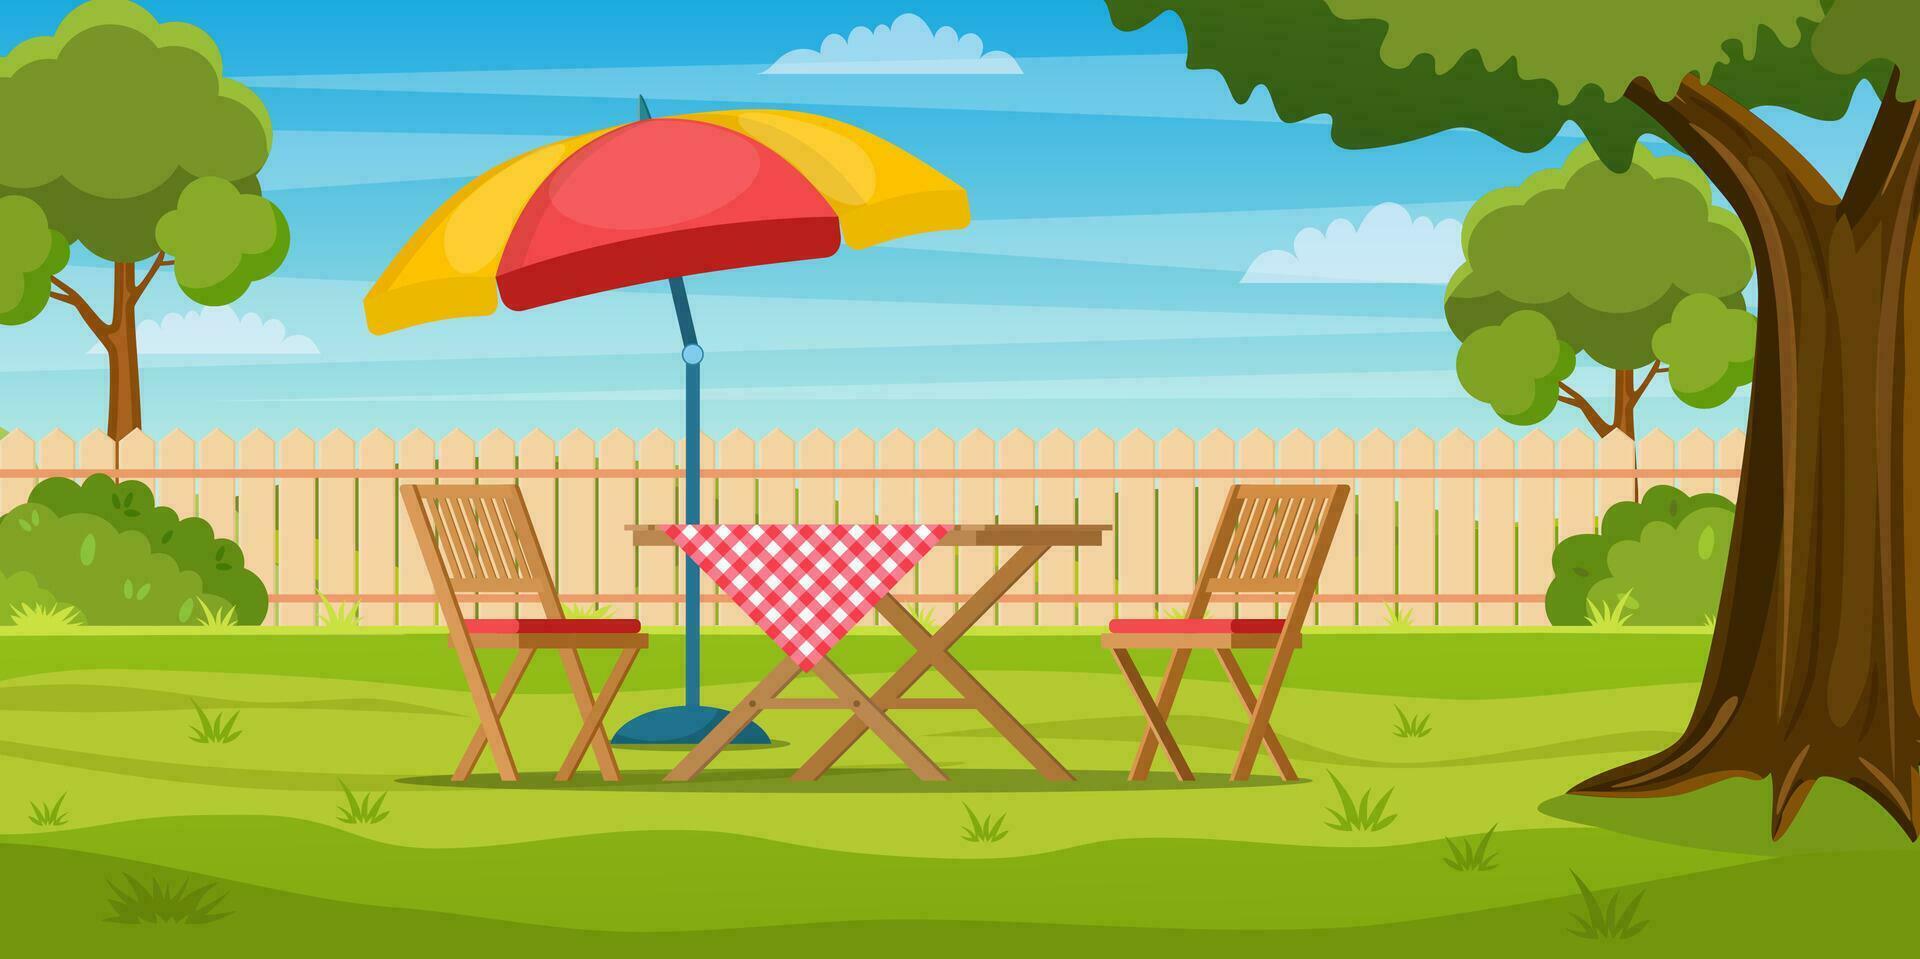 House backyard with green grass lawn, trees and bushes. Cartoon table and chairs garden modern furniture with large umbrella. Outdoor area for BBQ summer parties. Vector illustration in flat style